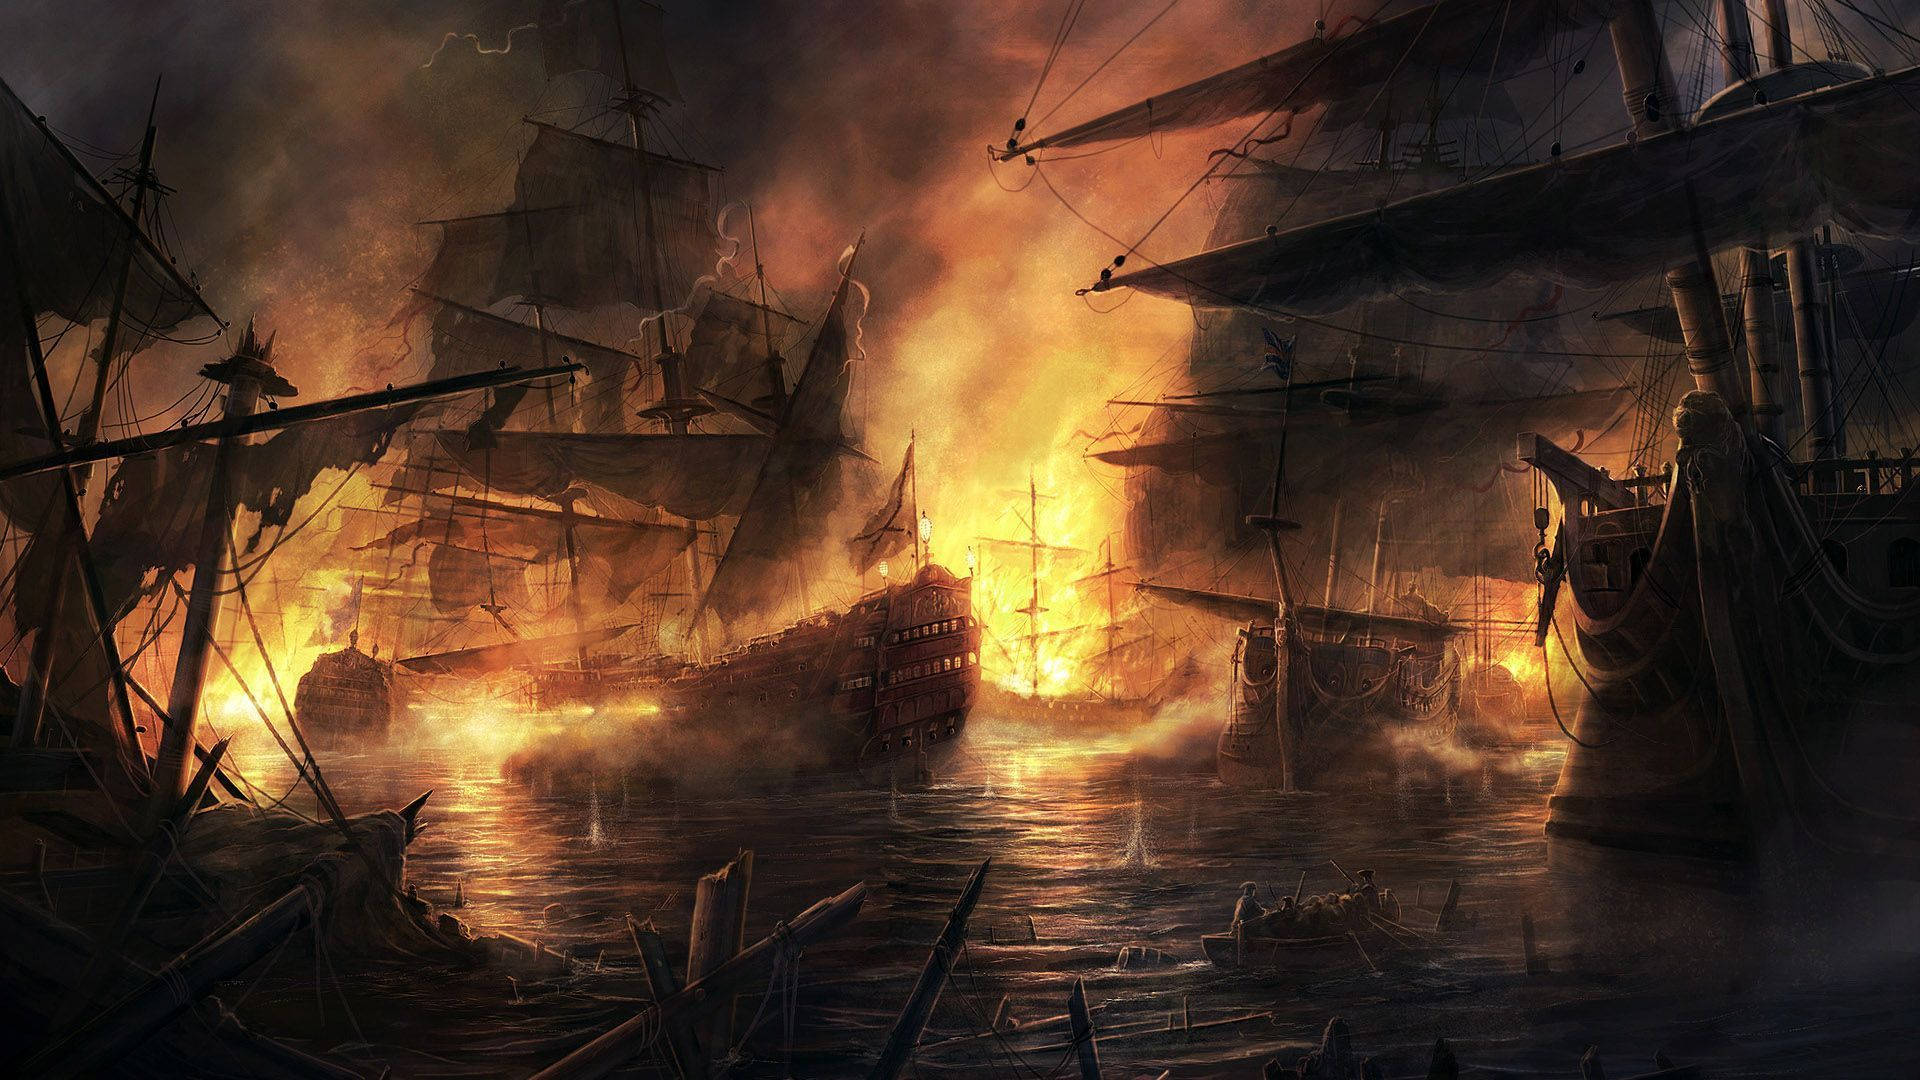 Pirate Ships On Fire Wallpaper